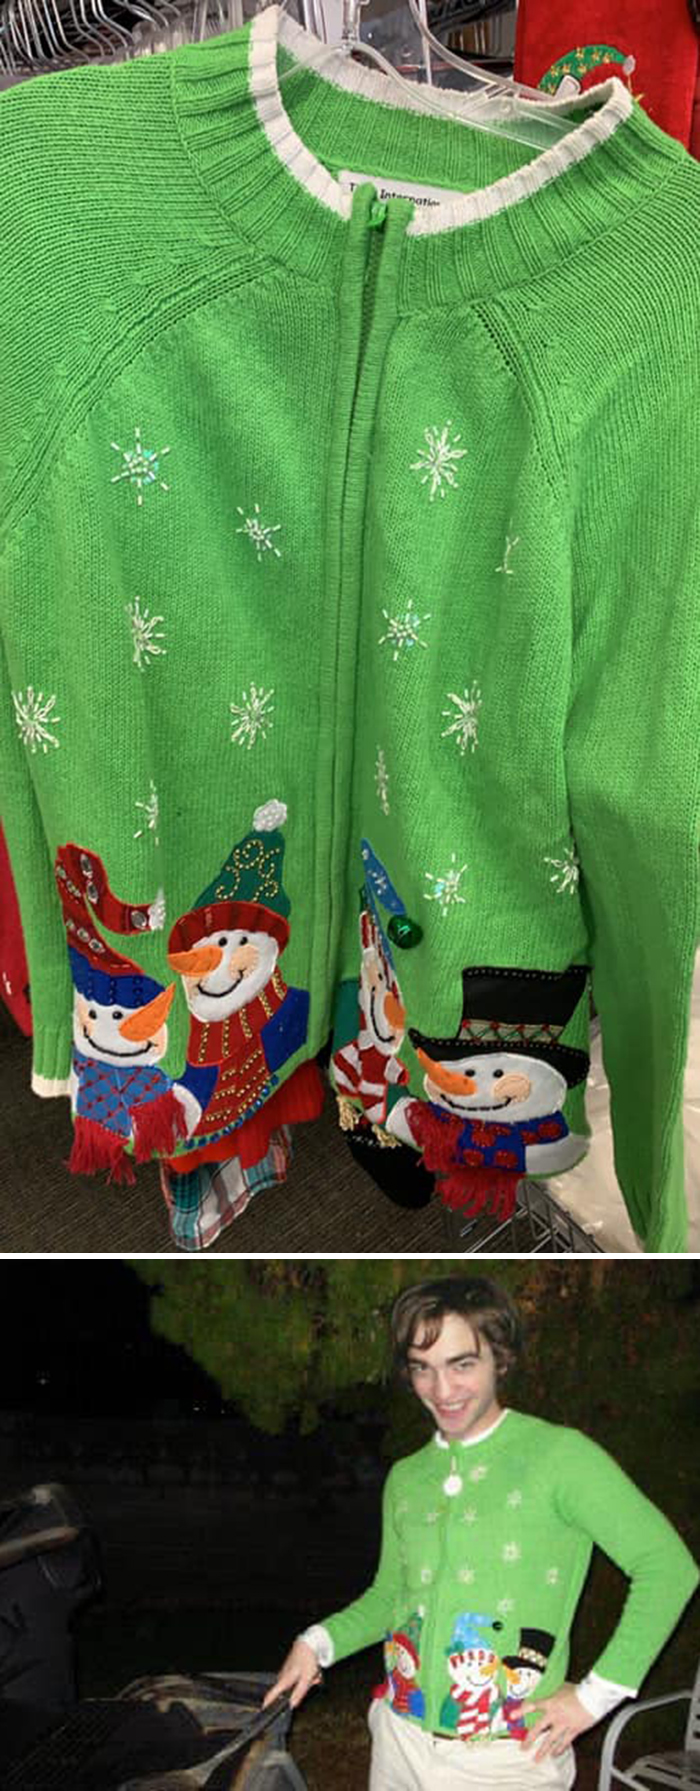 I Found (And Purchased) The Iconic Christmas Sweater From The Robert Pattinson Meme (Found At Goodwill)